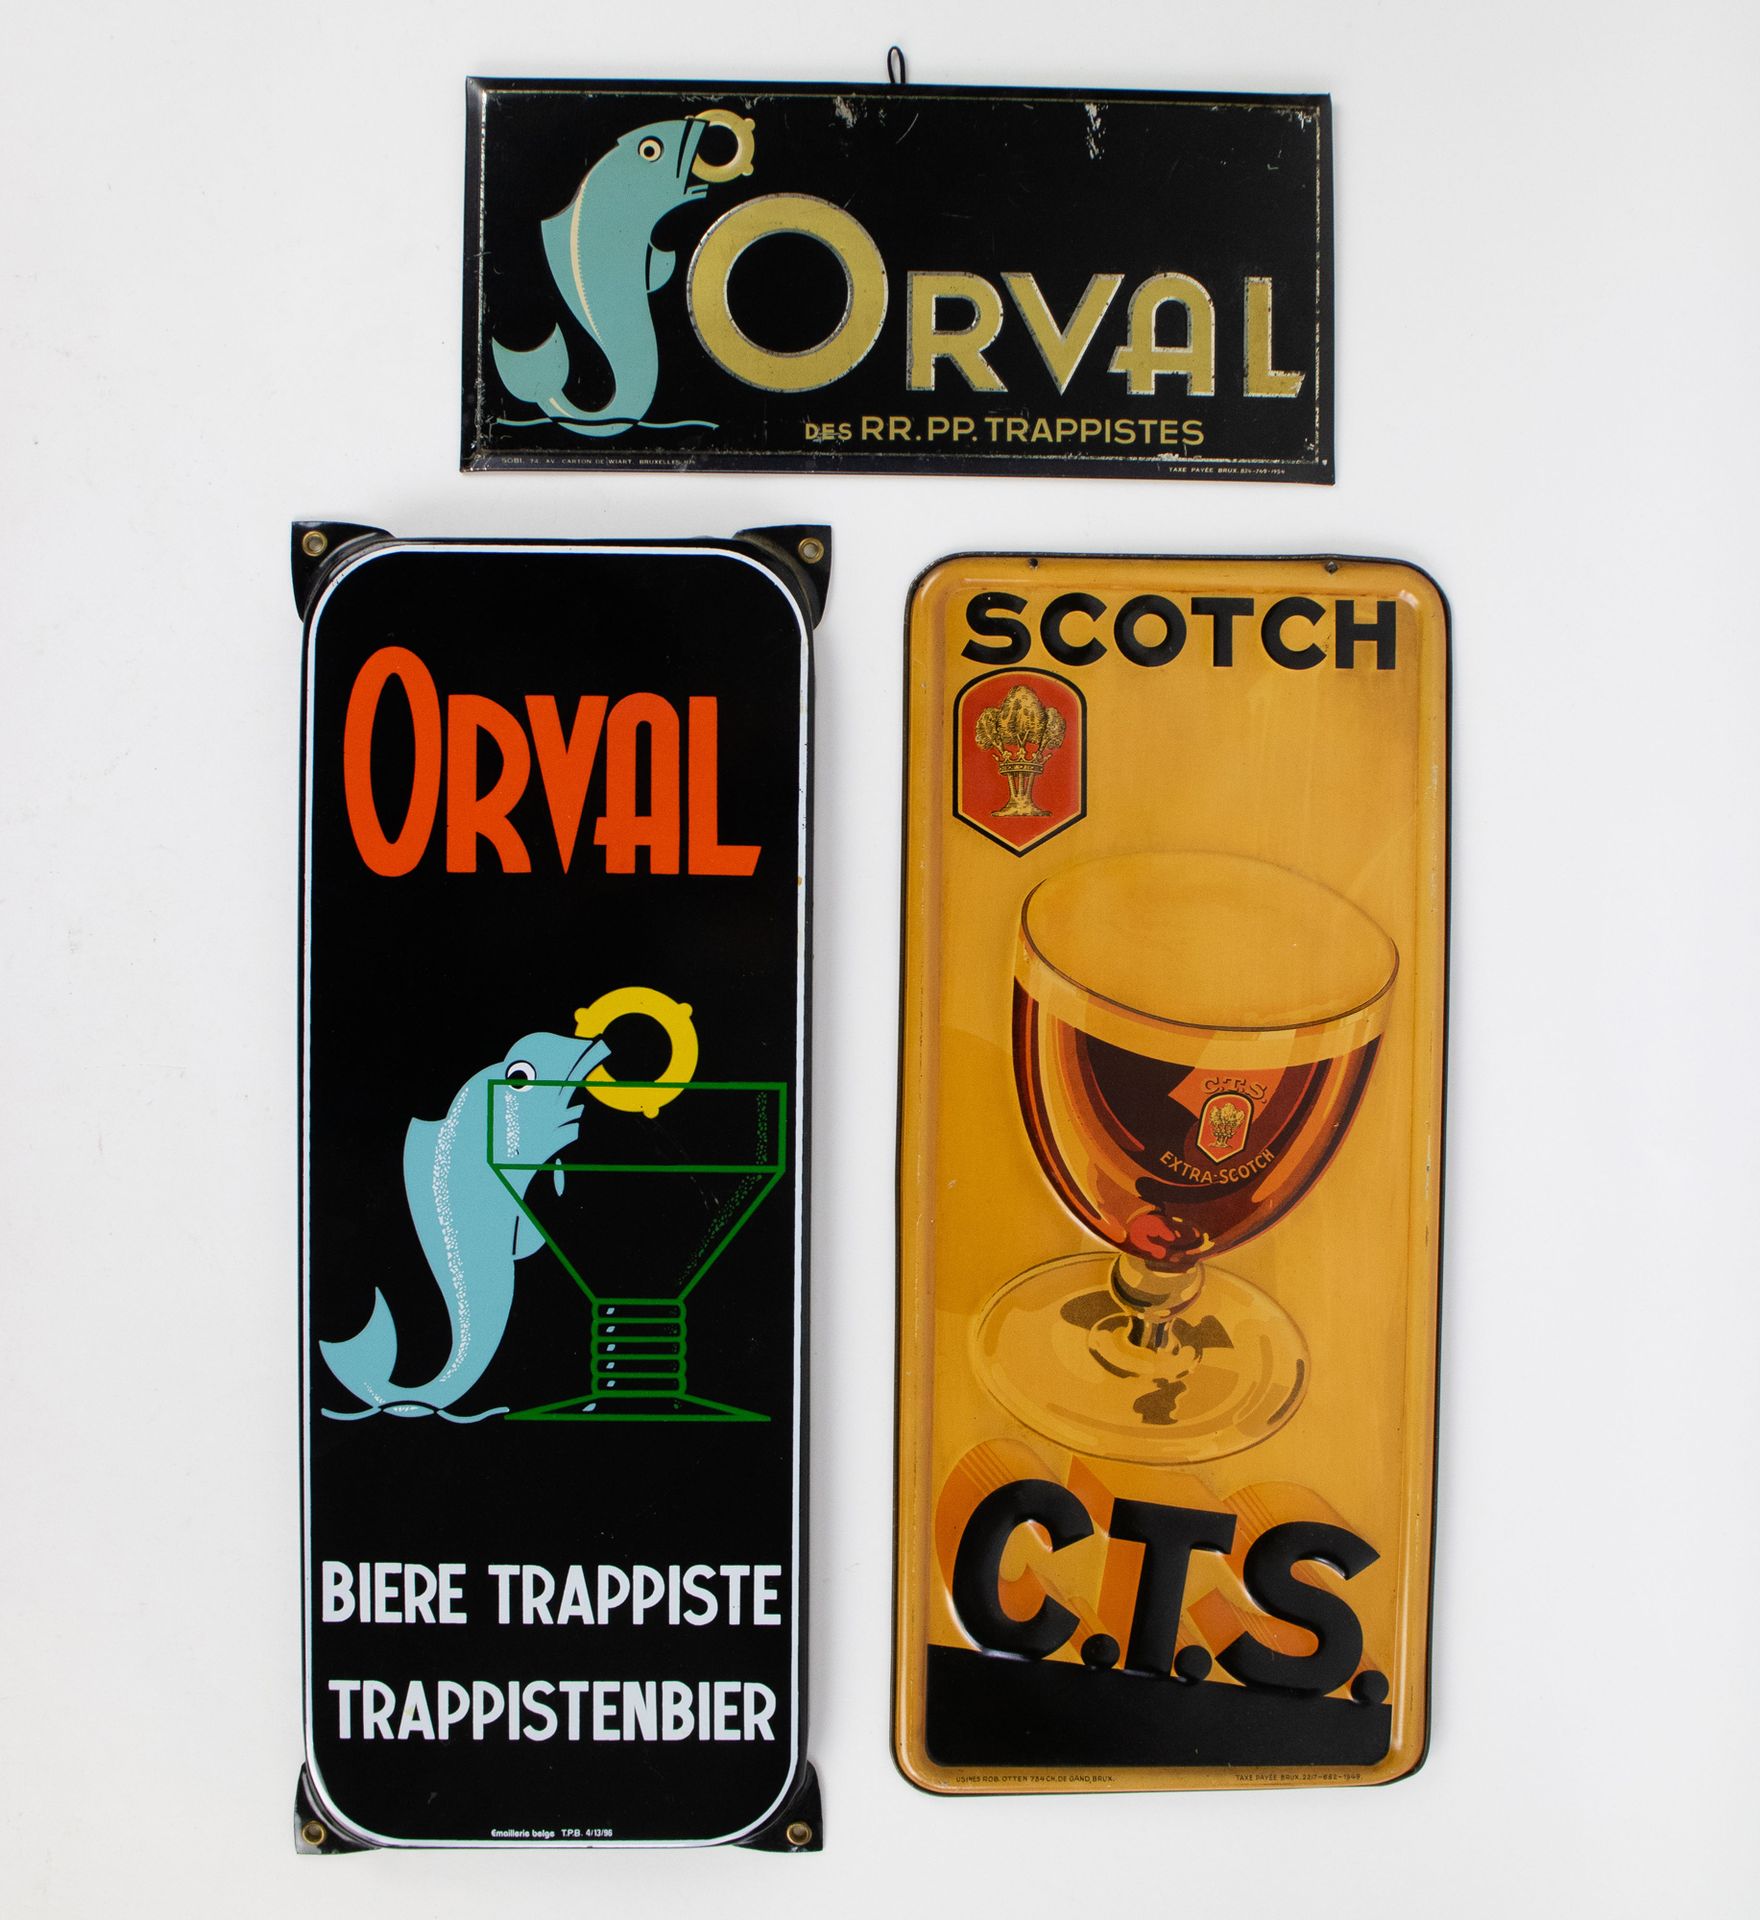 Null Metall Orval 1954, Scotch C.T.S. 1949 und Emaille ORVAL trappistenbier
Meta&hellip;